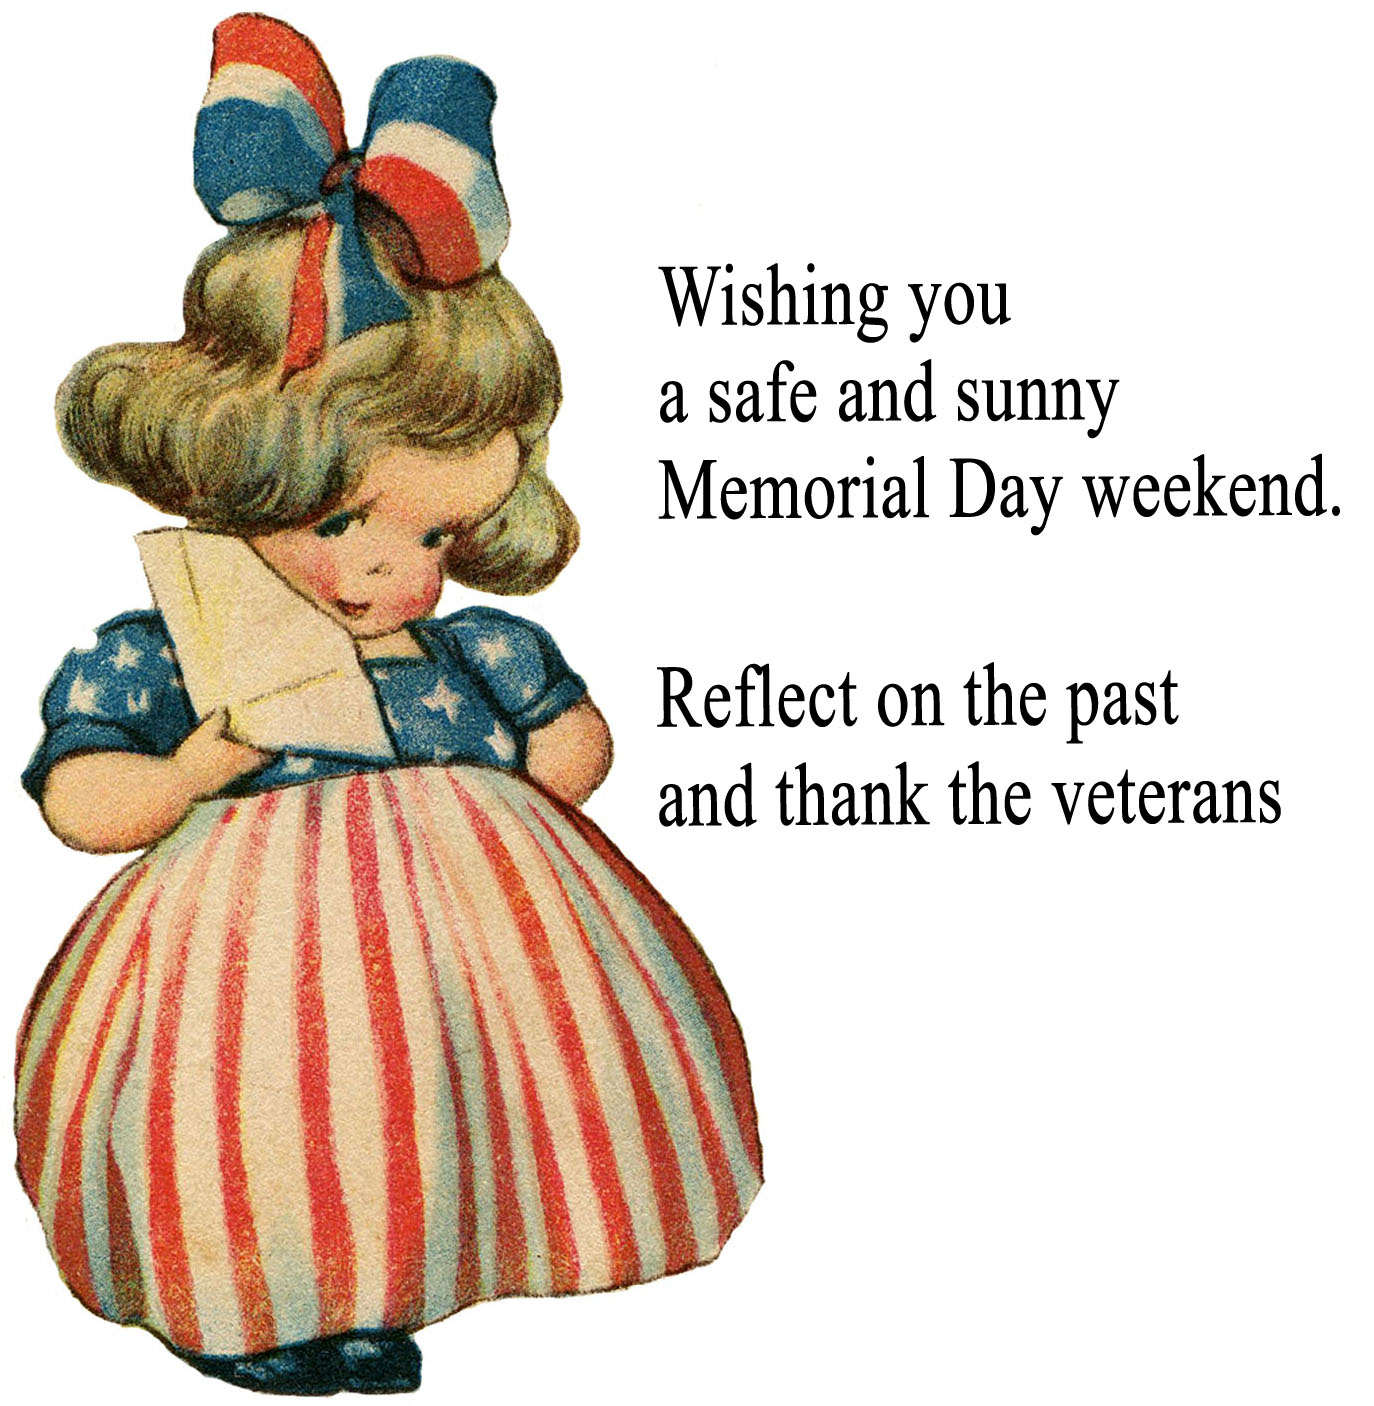 a Memorial Day weekend wish